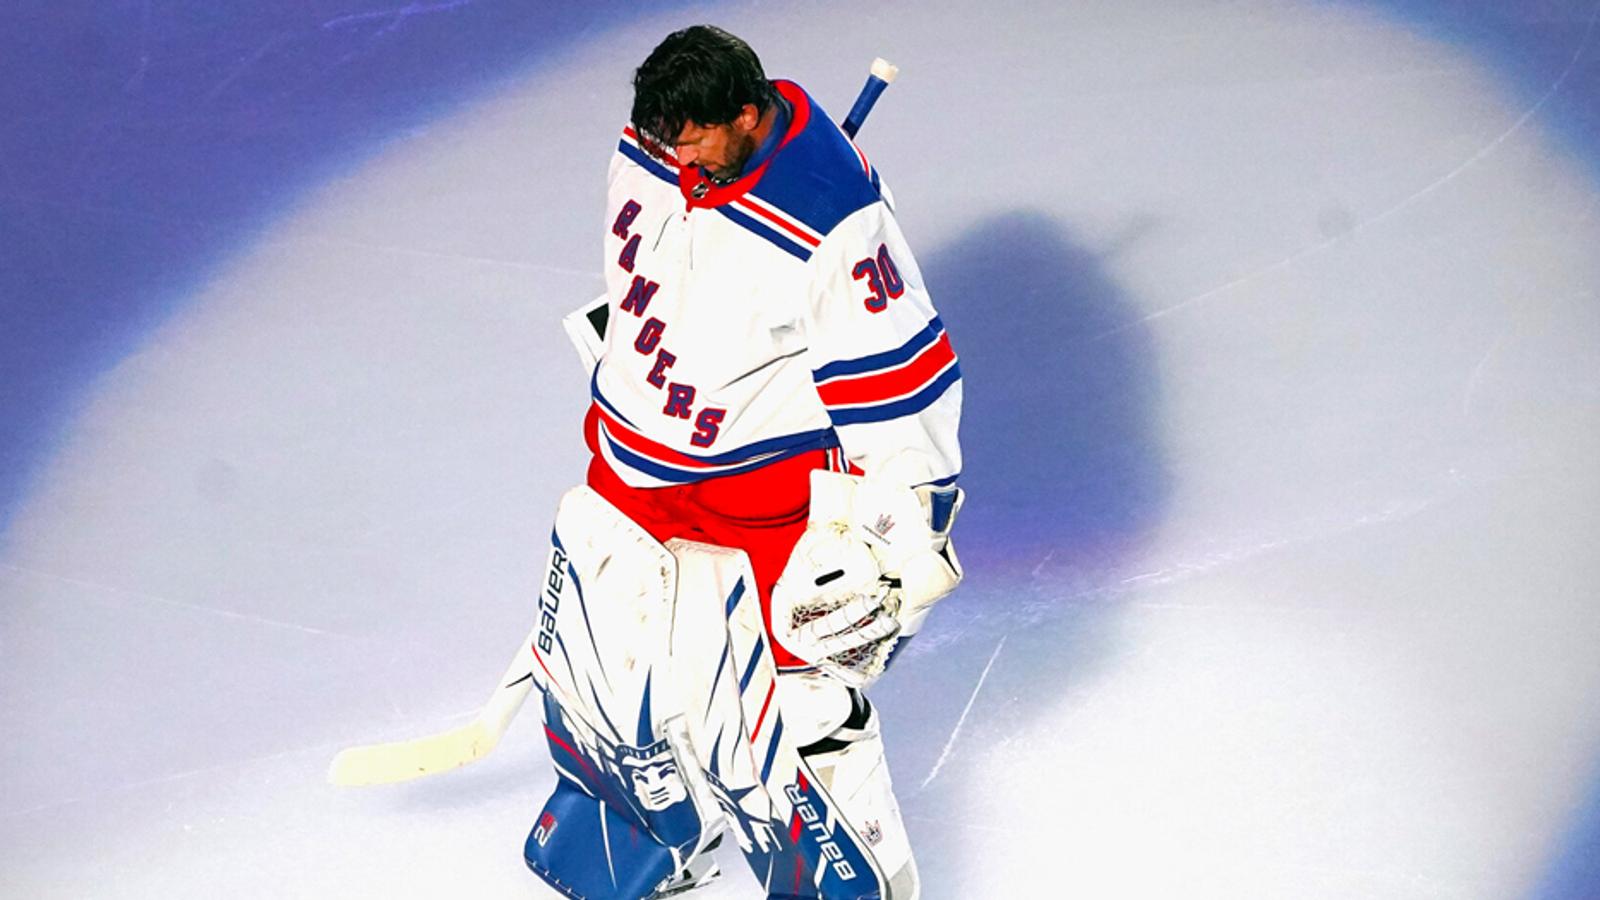 Rangers announce plans to honor Lundqvist just hours after he announces his retirement